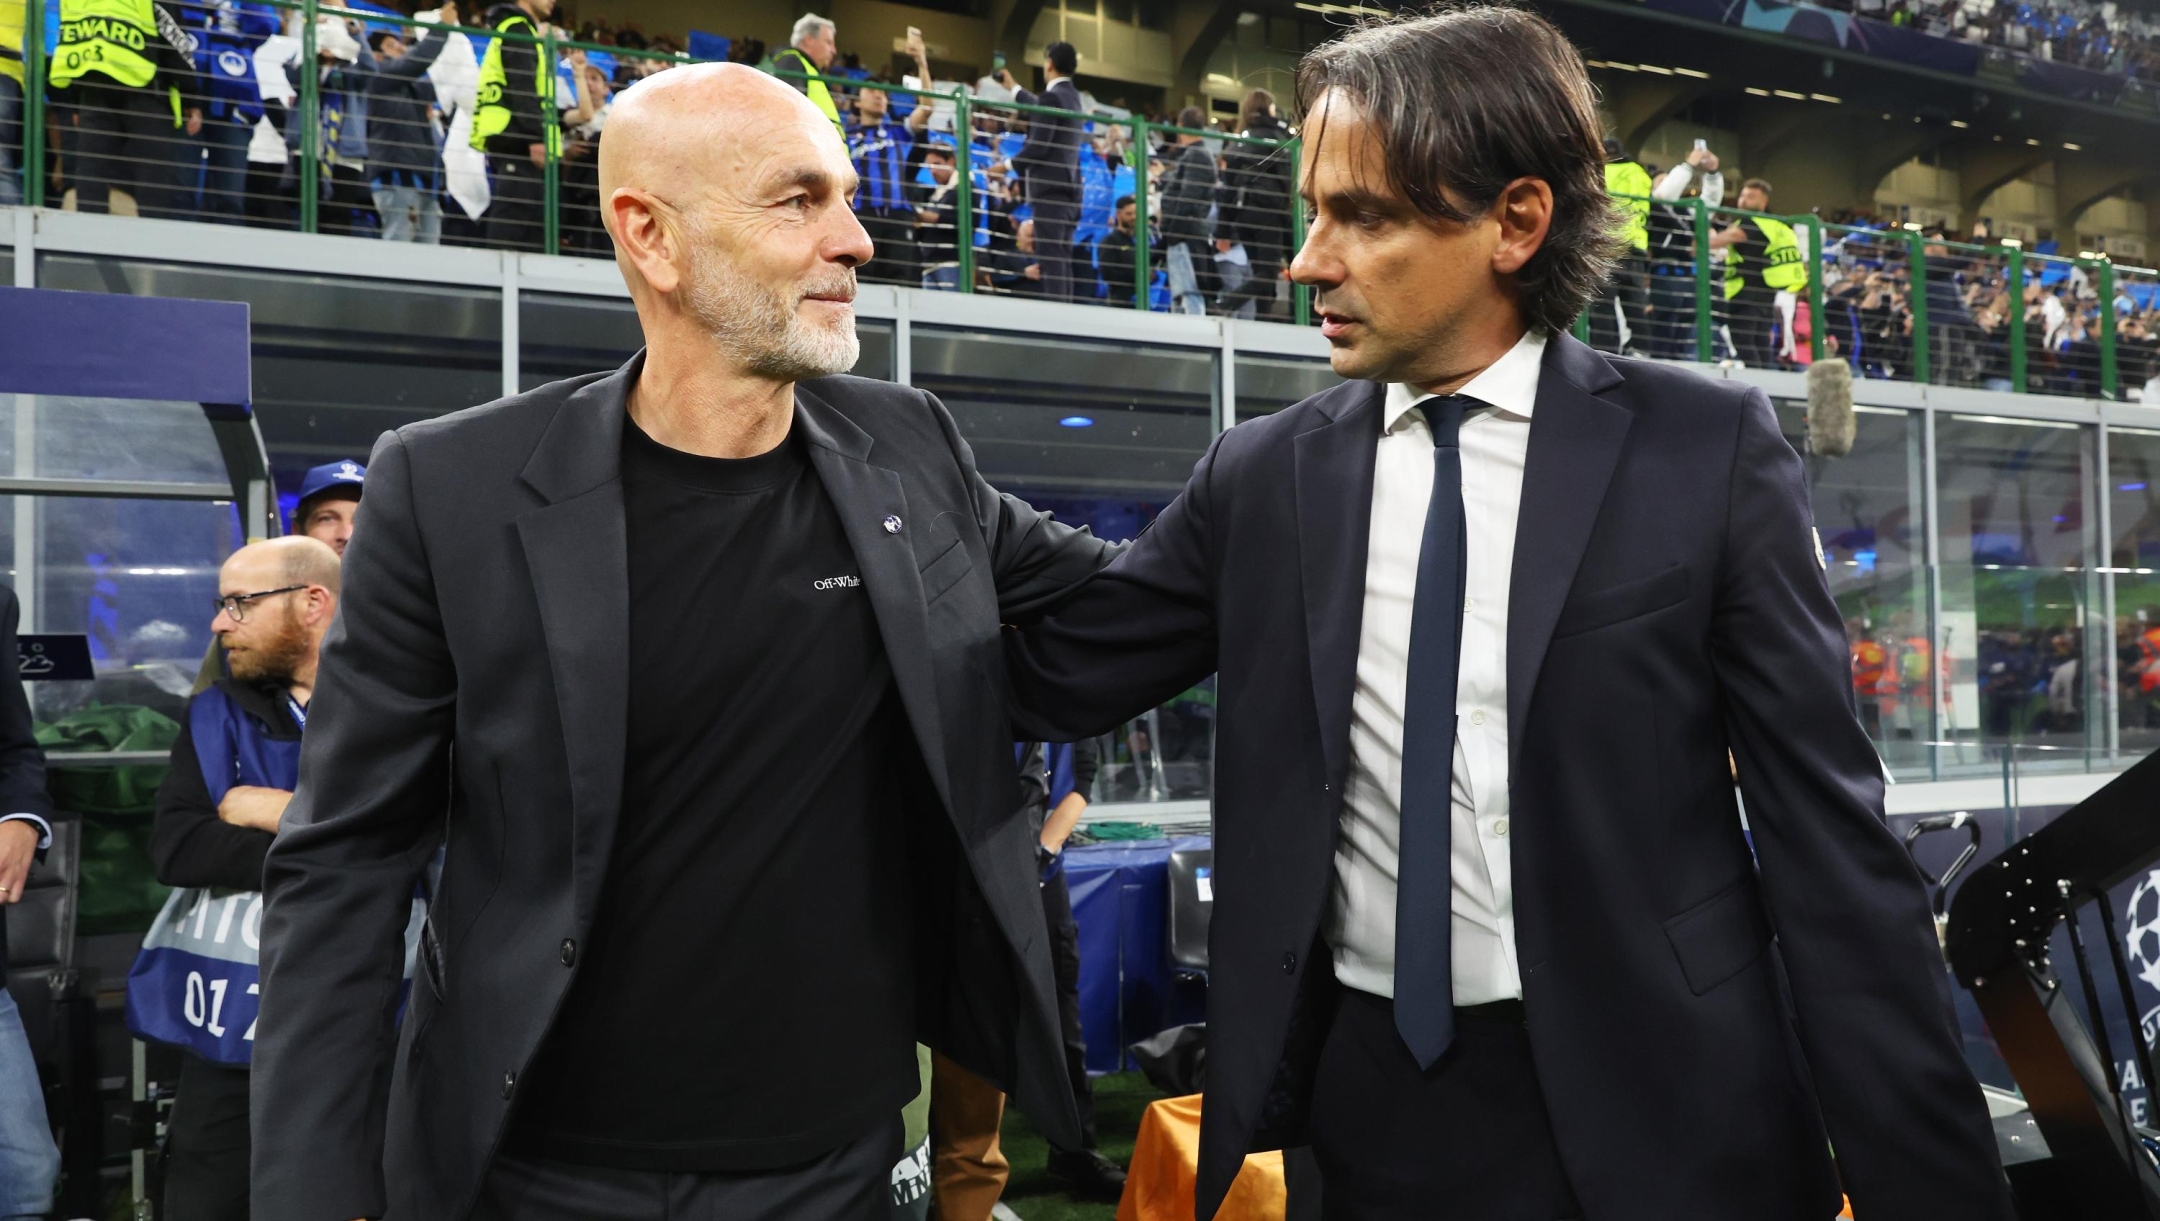 MILAN, ITALY - MAY 16: Stefano Pioli, Head Coach of AC Milan, talks to Simone Inzaghi, Head Coach of FC Internazionale, prior to the UEFA Champions League semi-final second leg match between FC Internazionale and AC Milan at Stadio Giuseppe Meazza on May 16, 2023 in Milan, Italy. (Photo by Alexander Hassenstein/Getty Images)